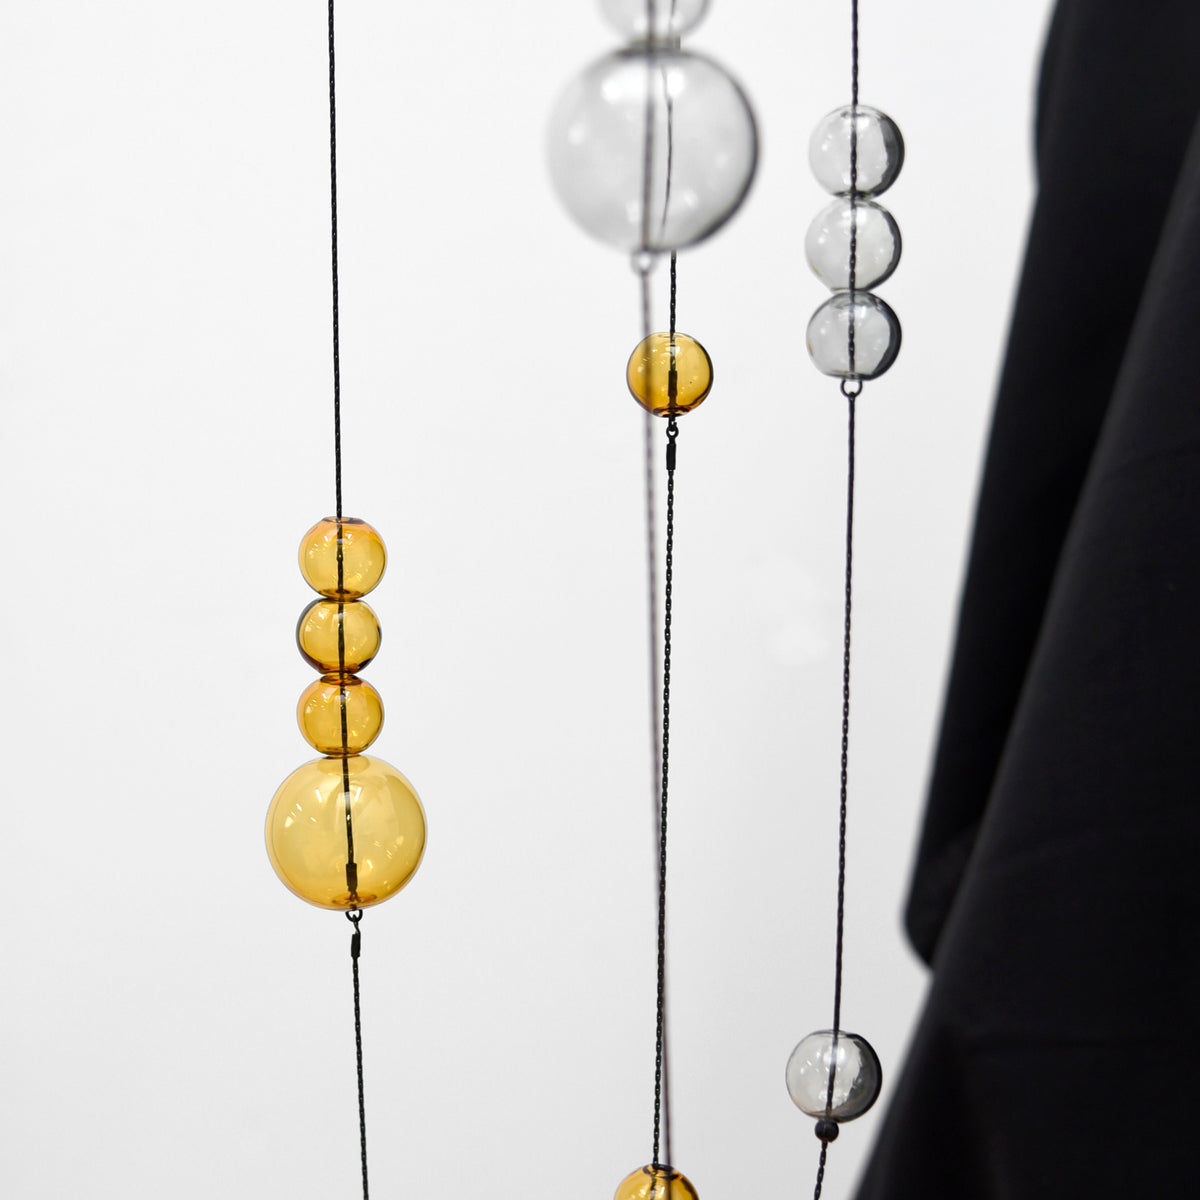 Hanging grey and gold glass bubble necklaces.